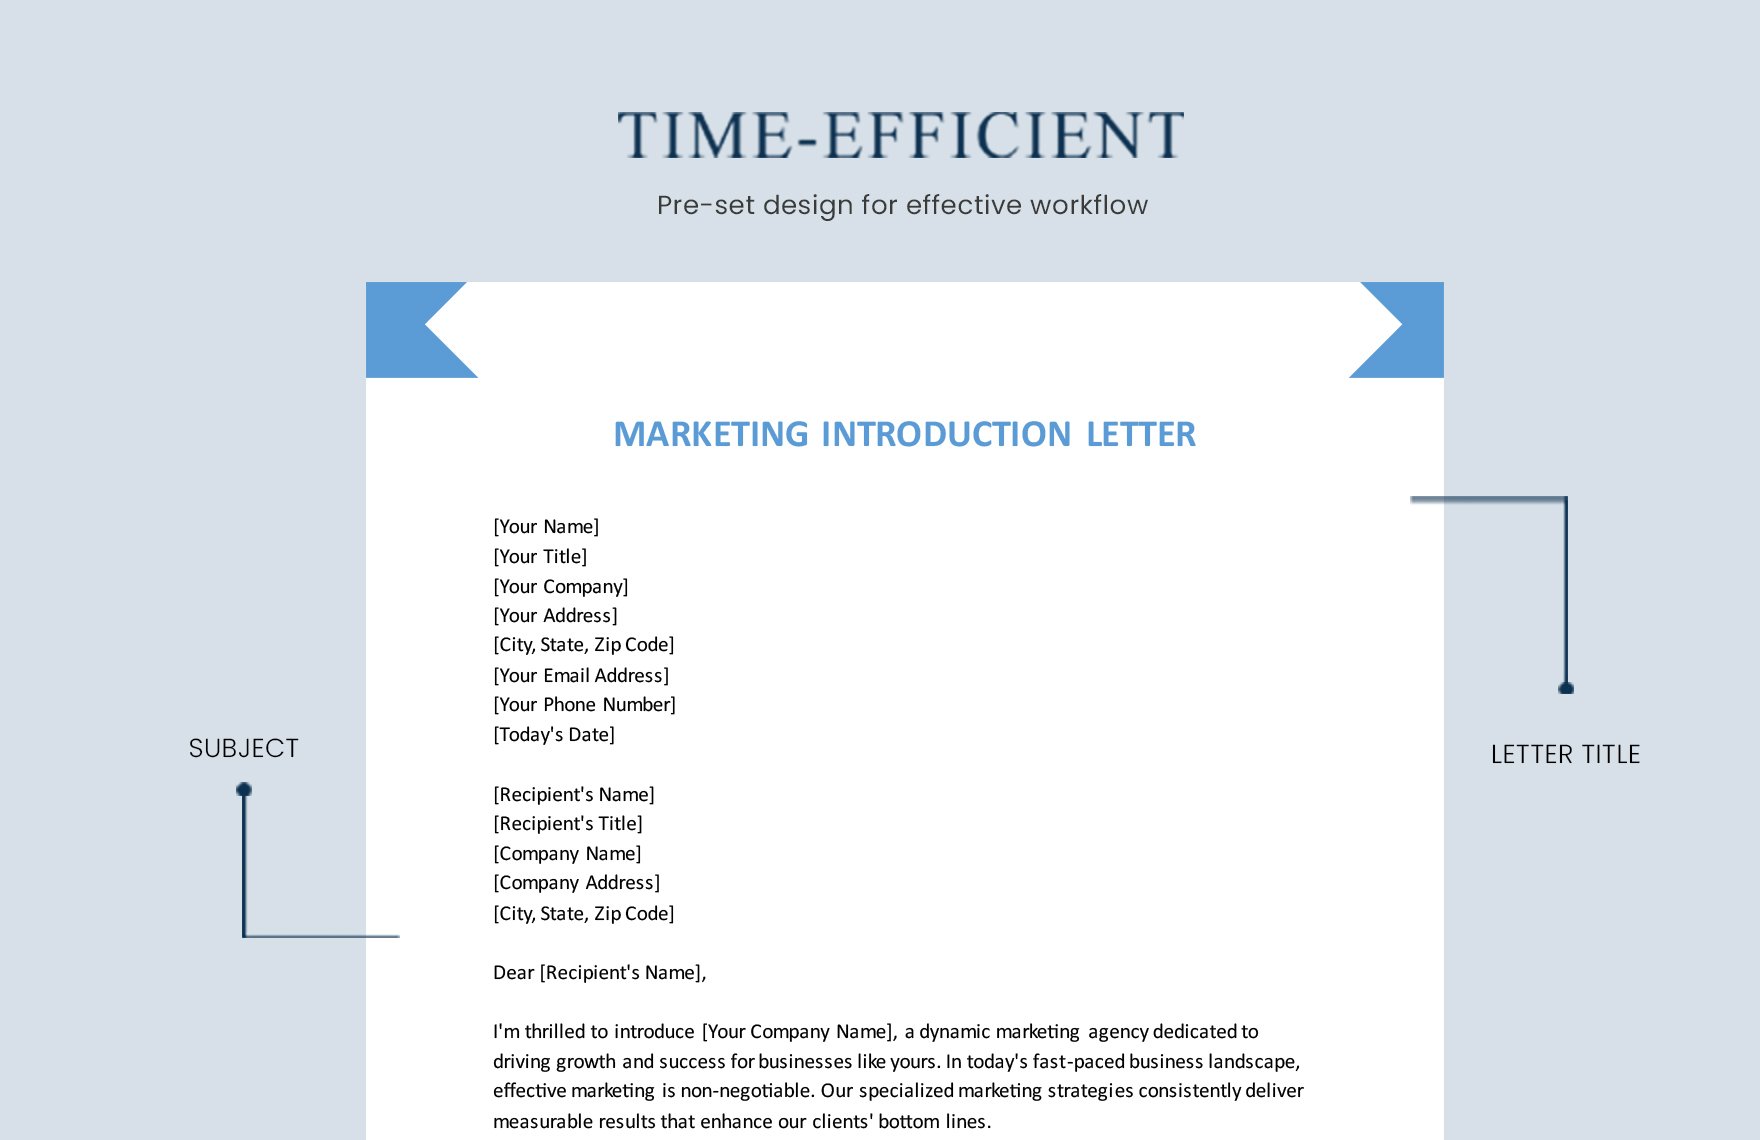 Marketing Introduction Letter